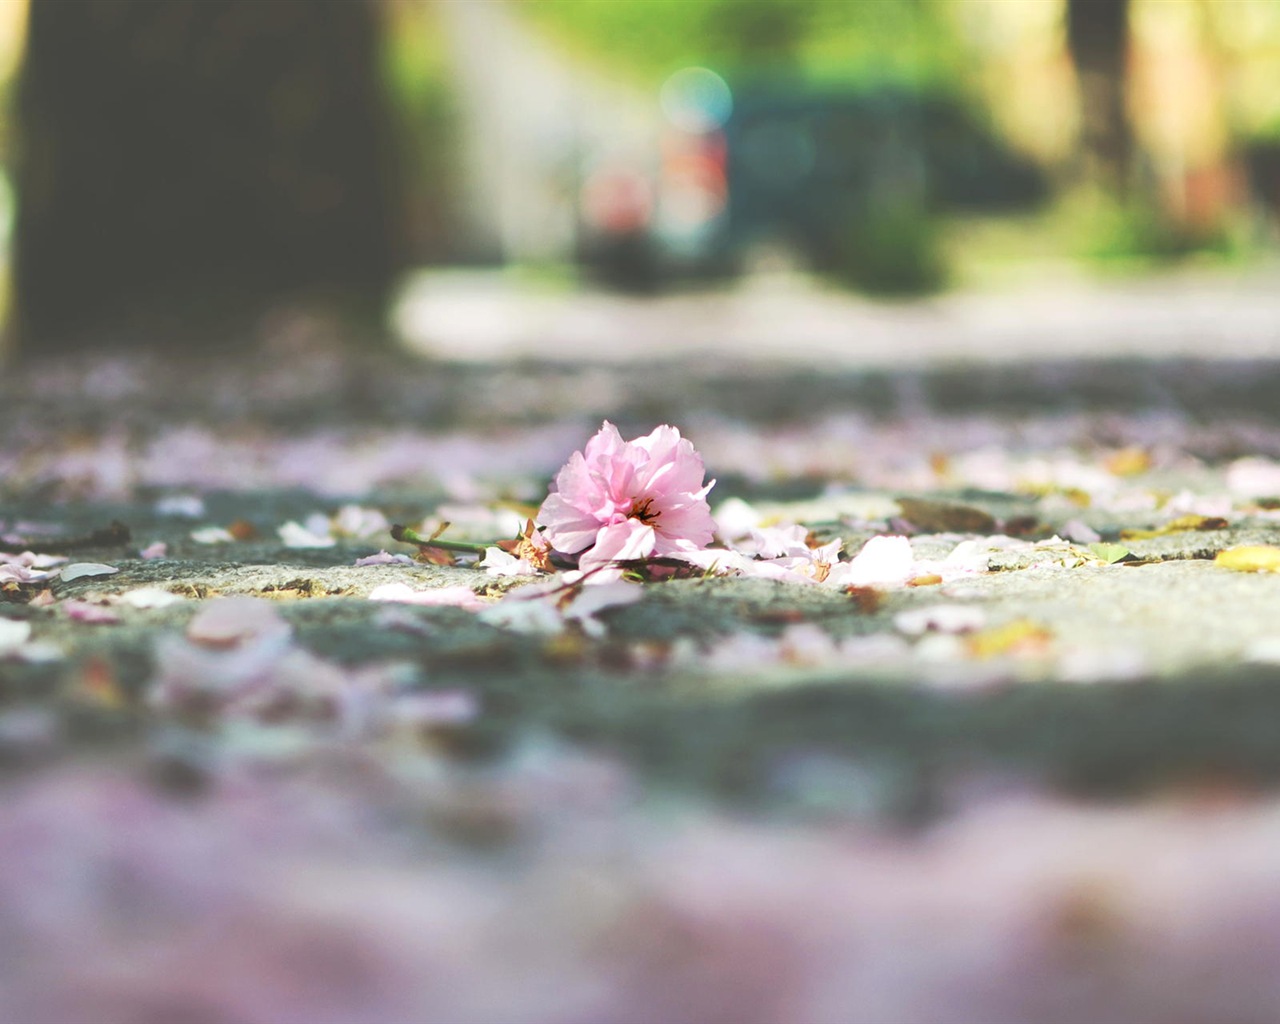 Flowers fall on ground, beautiful HD wallpapers #9 - 1280x1024